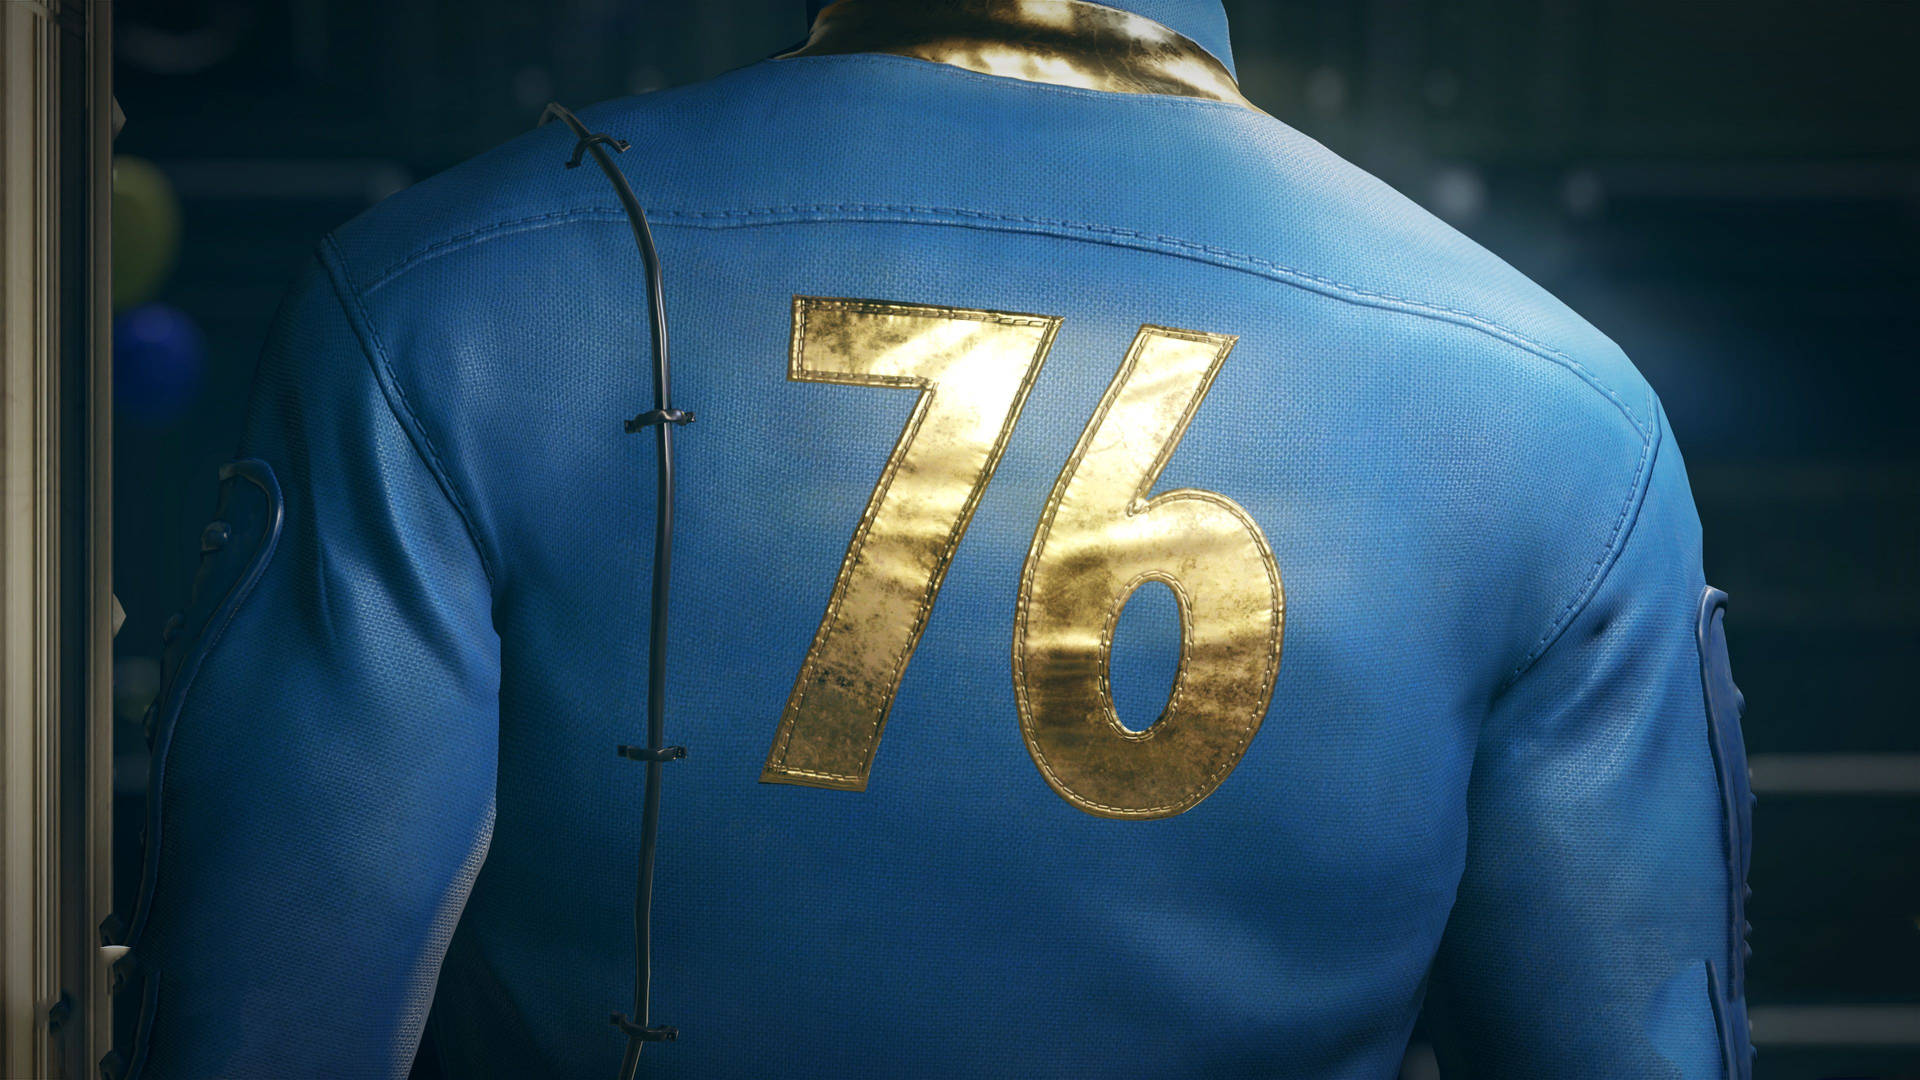 Fallout 76 Cosplay Jacket Background